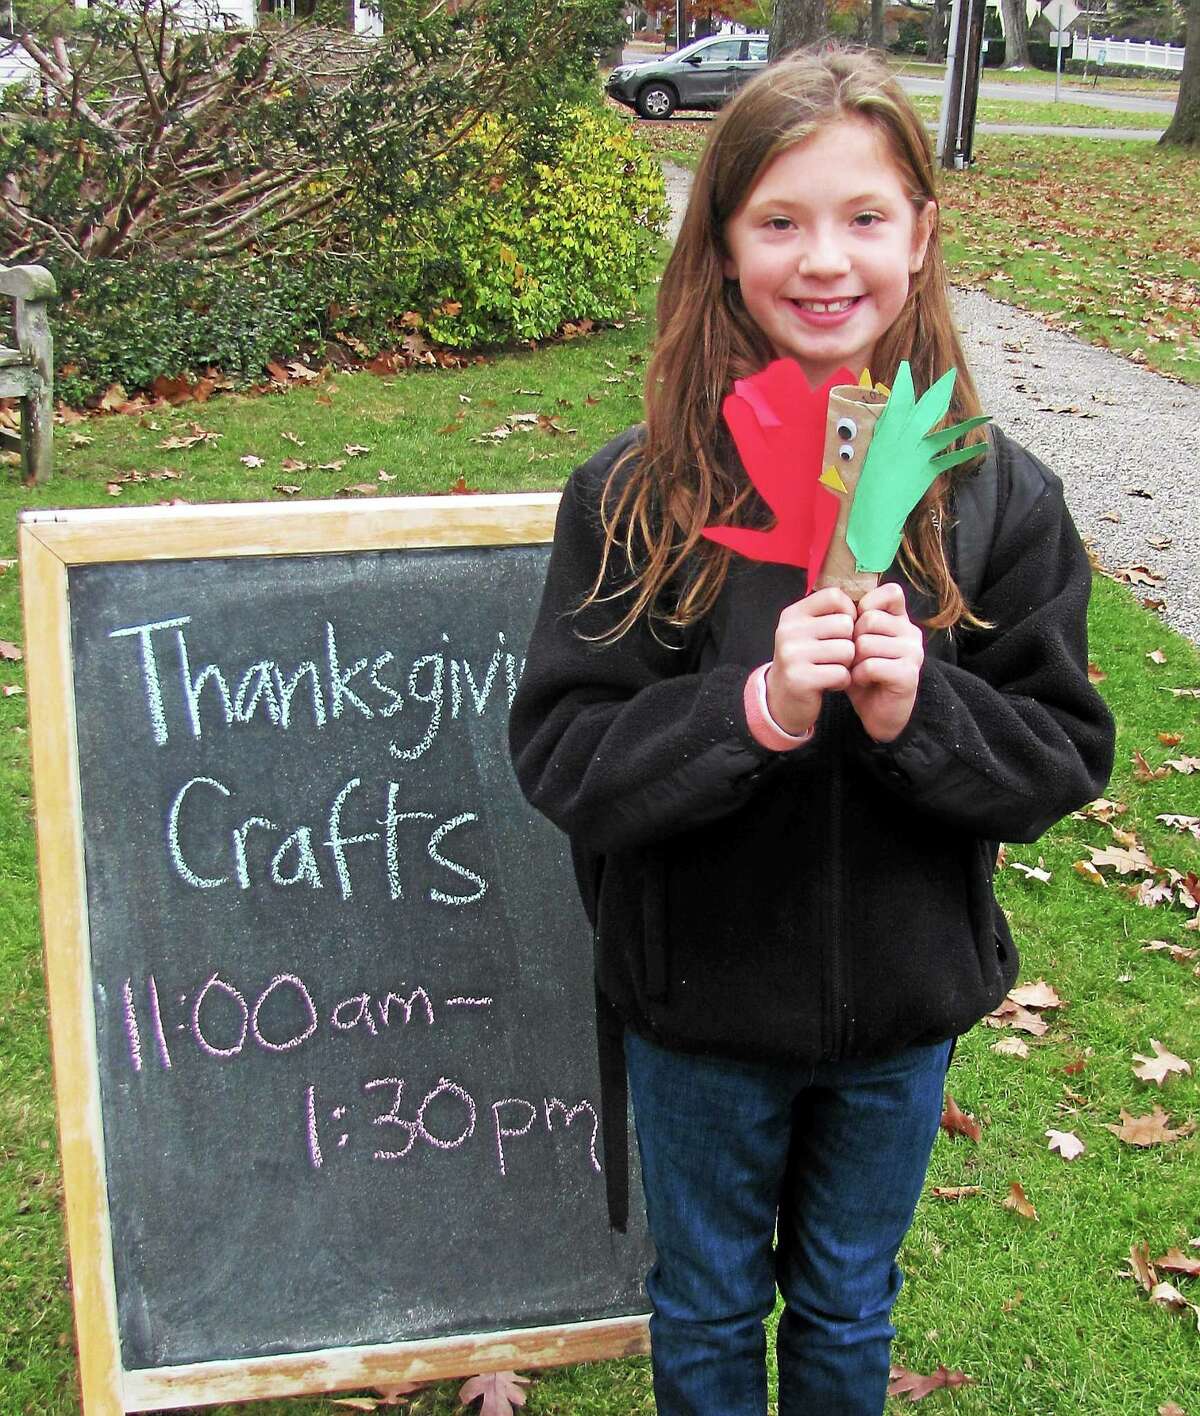 The Litchfield Historical Society hosted a Thanksgiving crafts workshop Sunday at the Litchfield History museum, allowing families to create hand-made items incluing a turkey with hand-cut tail feathers, a pumpkin and a thankful wreath.